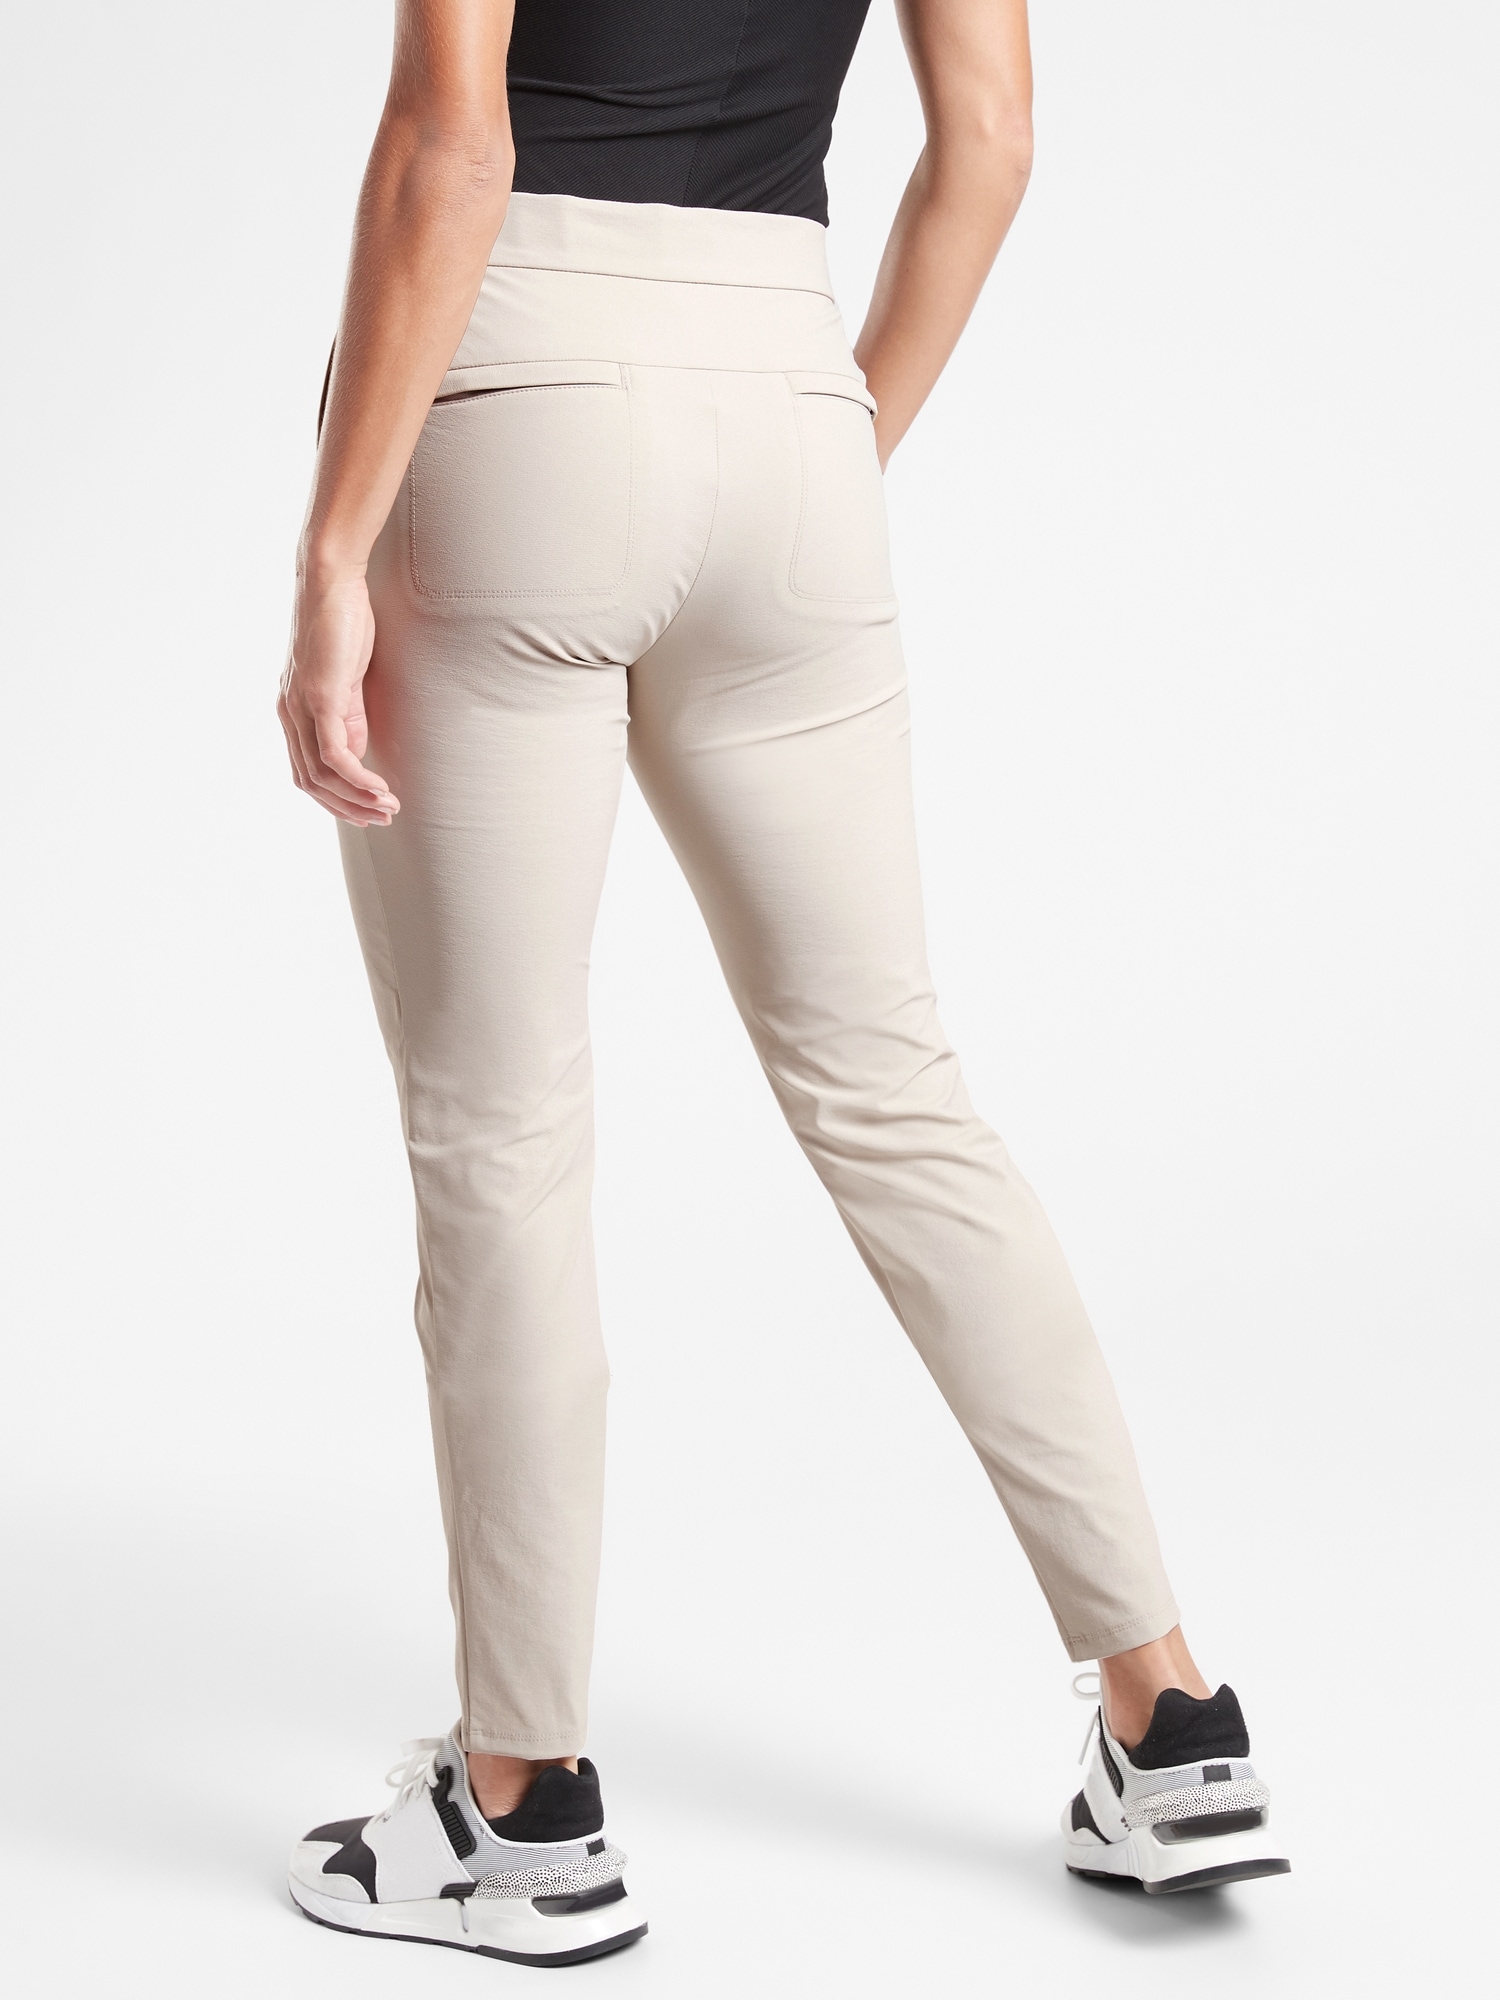 Details about  / ATHLETA WANDER STRAIGHT PANT WORK HIKING $108.00 NWT SIZE 12 TALL #353692